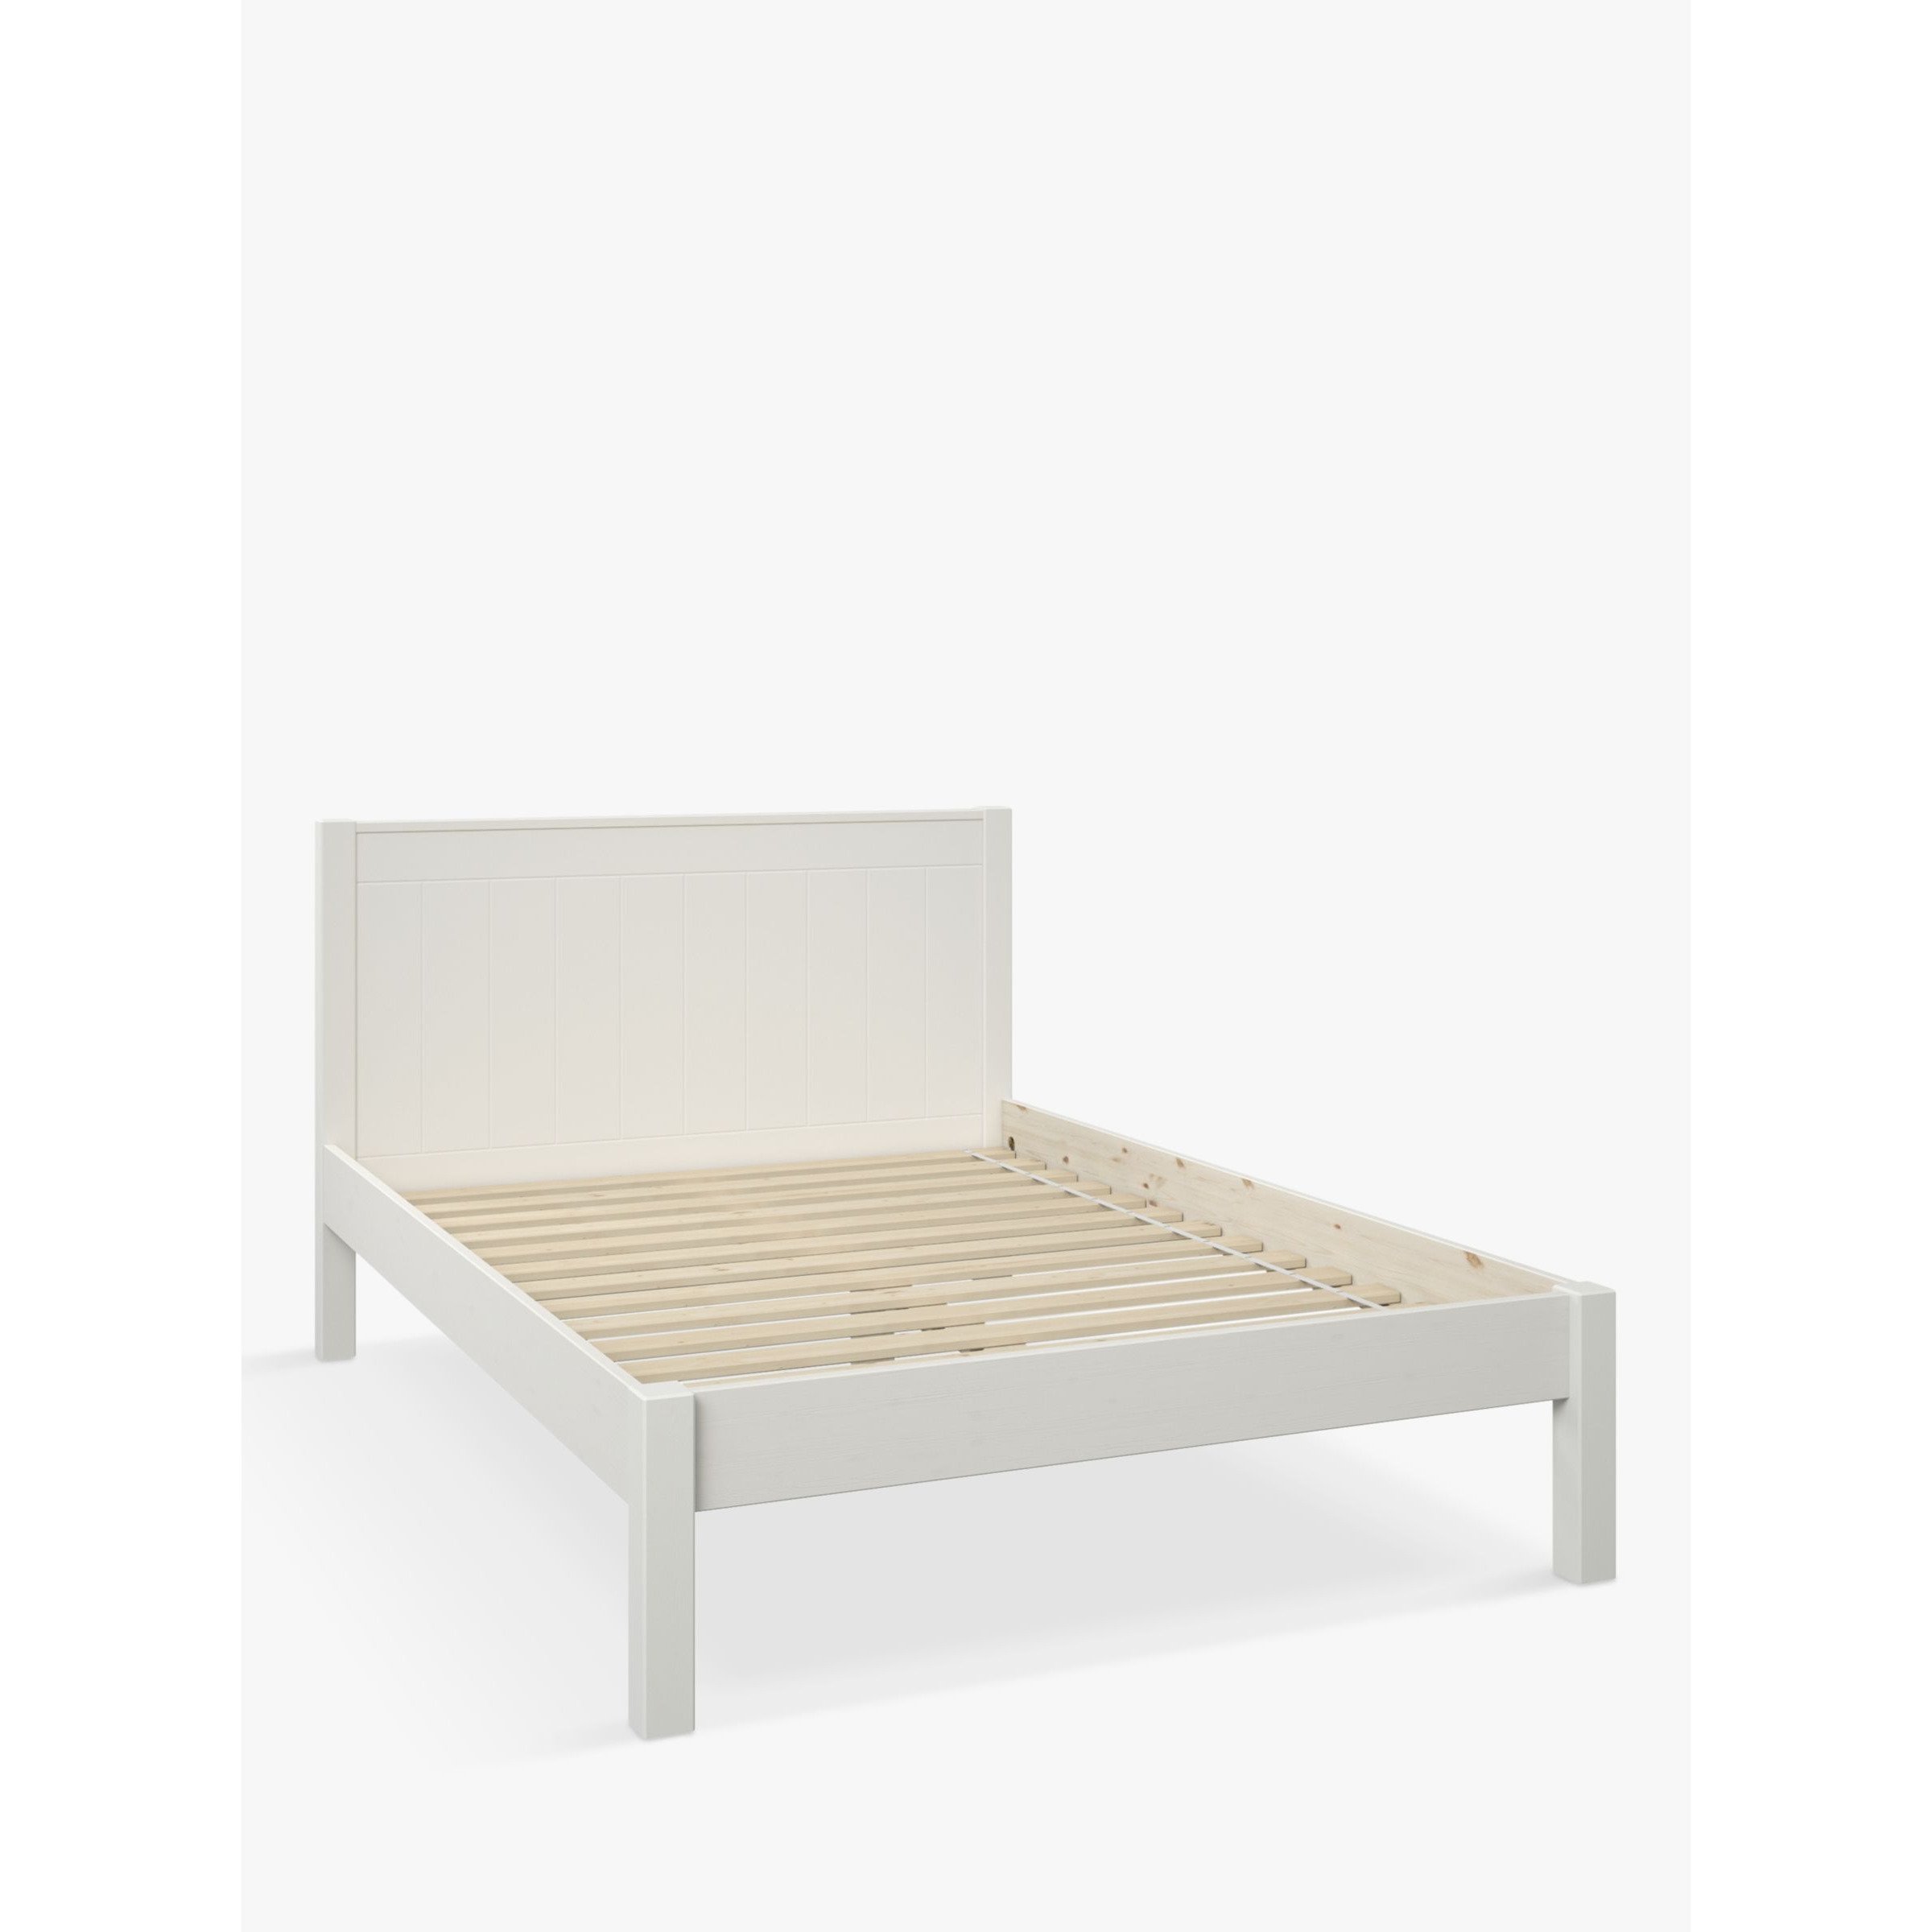 Stompa Classic Low End Wooden Bed Frame, Double - image 1